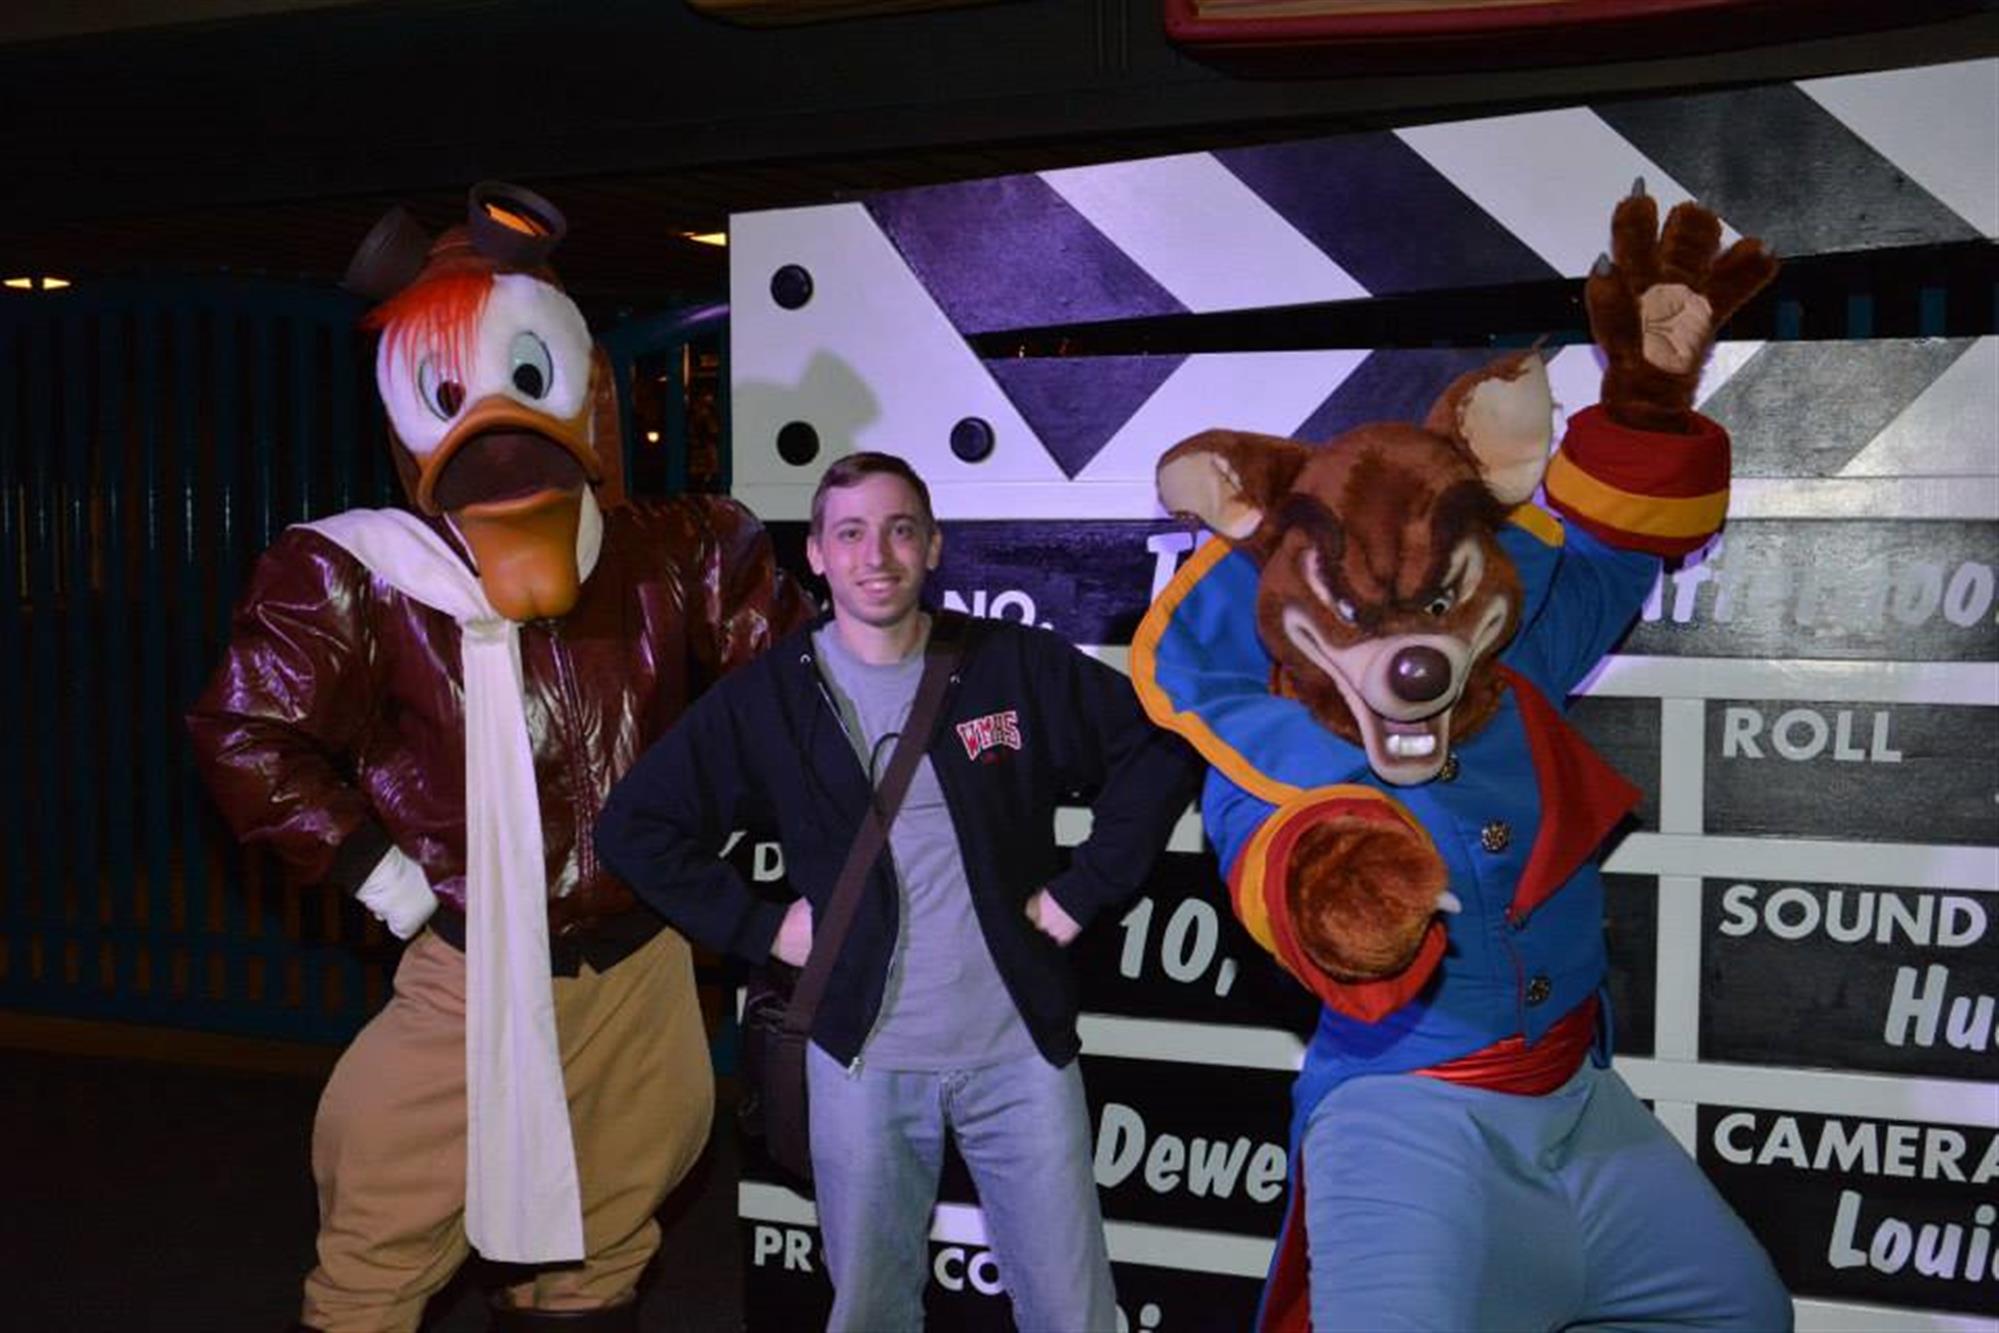 Kyle hangs with Launchpad McQuack and Don Karnage at Disneyland in 2014